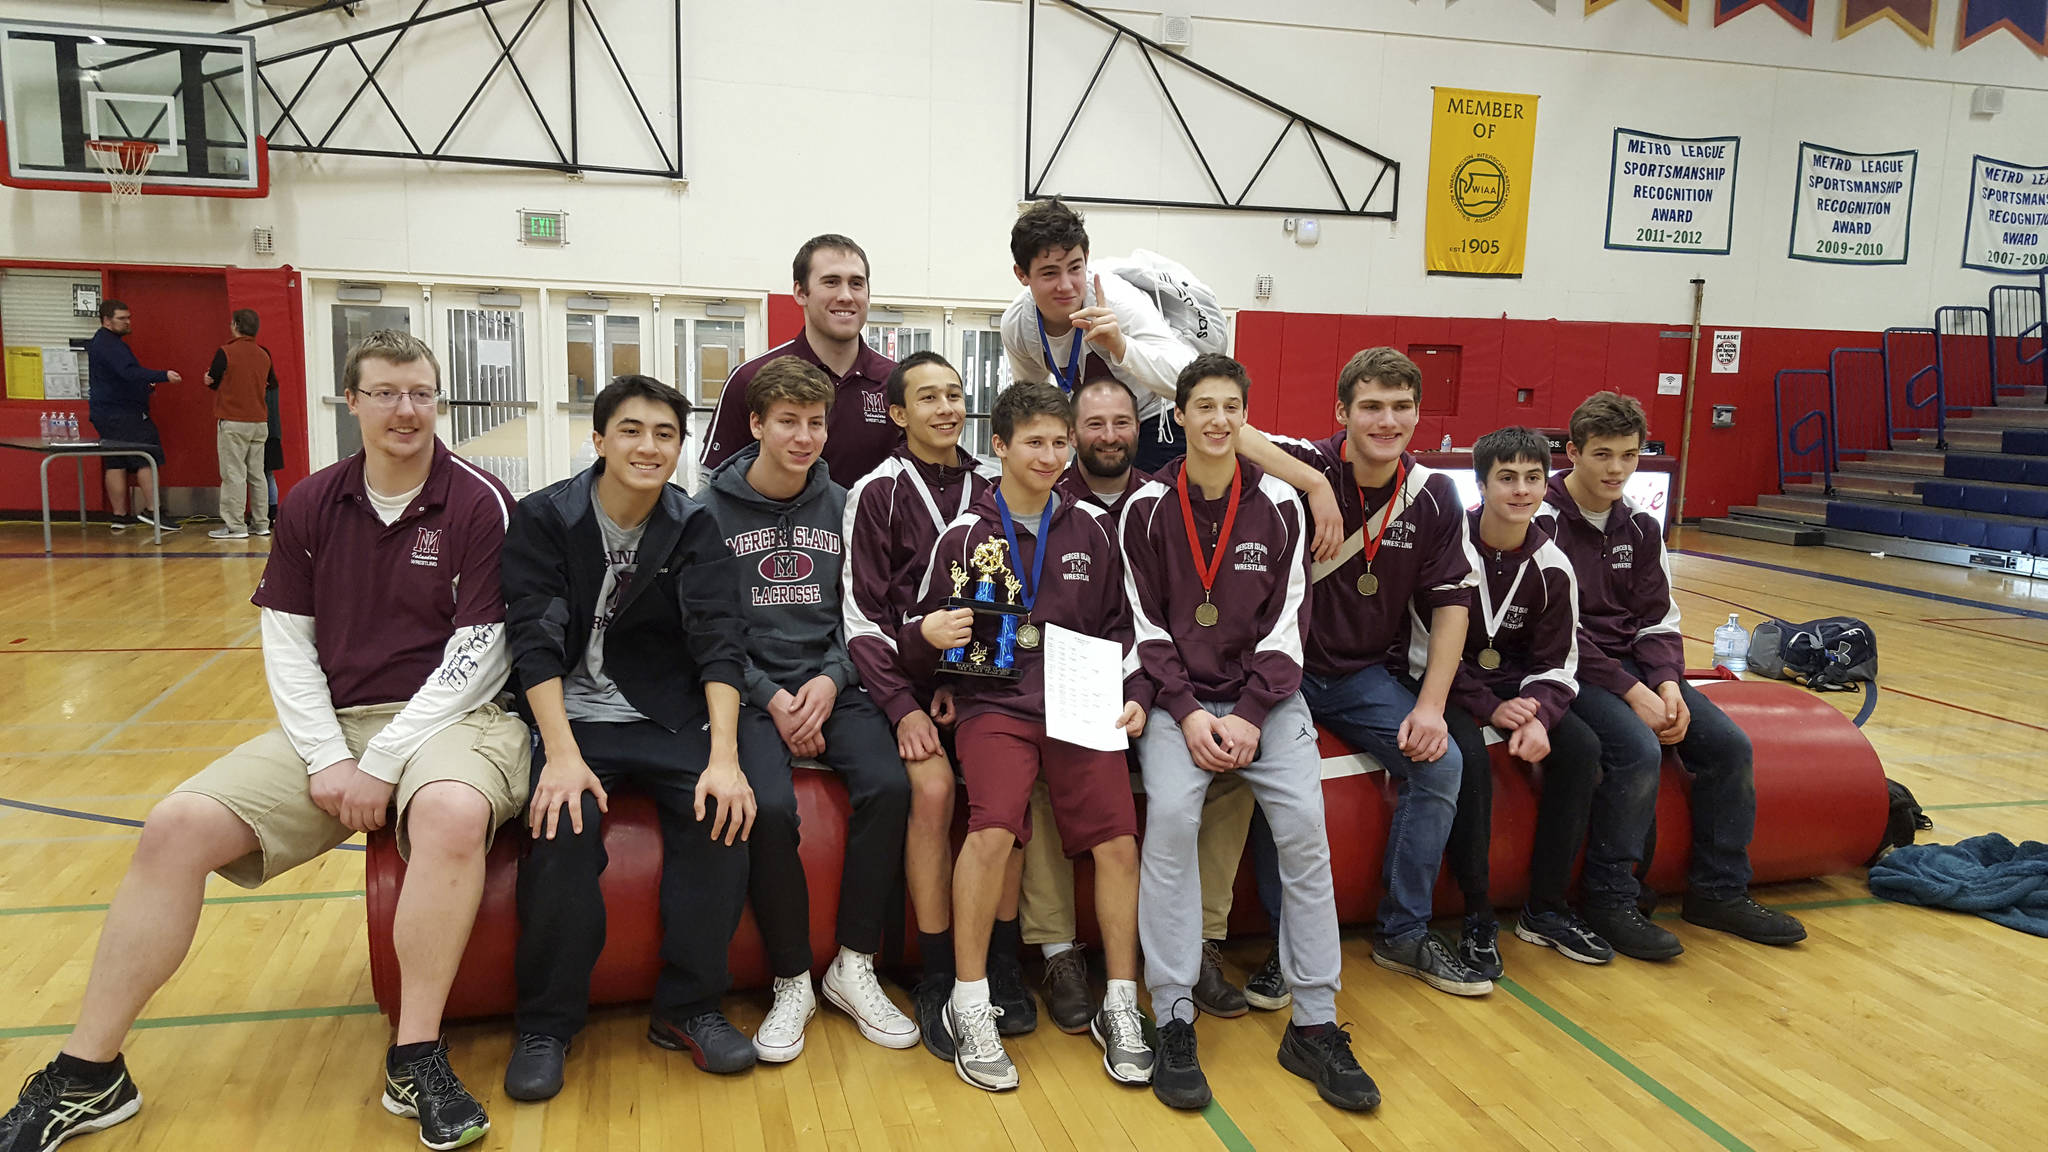 Photo courtesy of Virl Hill                                The Mercer Island Islanders wrestling team earned a third place finish at the Barry Knott Classic wrestling tournament on Dec. 16 at Nathan Hale High School in Seattle. Islanders’ wrestlers earning first place were Jonah Andrews (160) and Jordan Tillinger (126). Athletes attaining second place in their respective weight divisions consisted of Eli Pruchno (138) and Connor Hill (195). Liam Farrell (170), Connor Pettigrew (113) and Andrew Motz (132) nabbed third place finishes. Vinny Ricci (152) registered a fifth place finish.